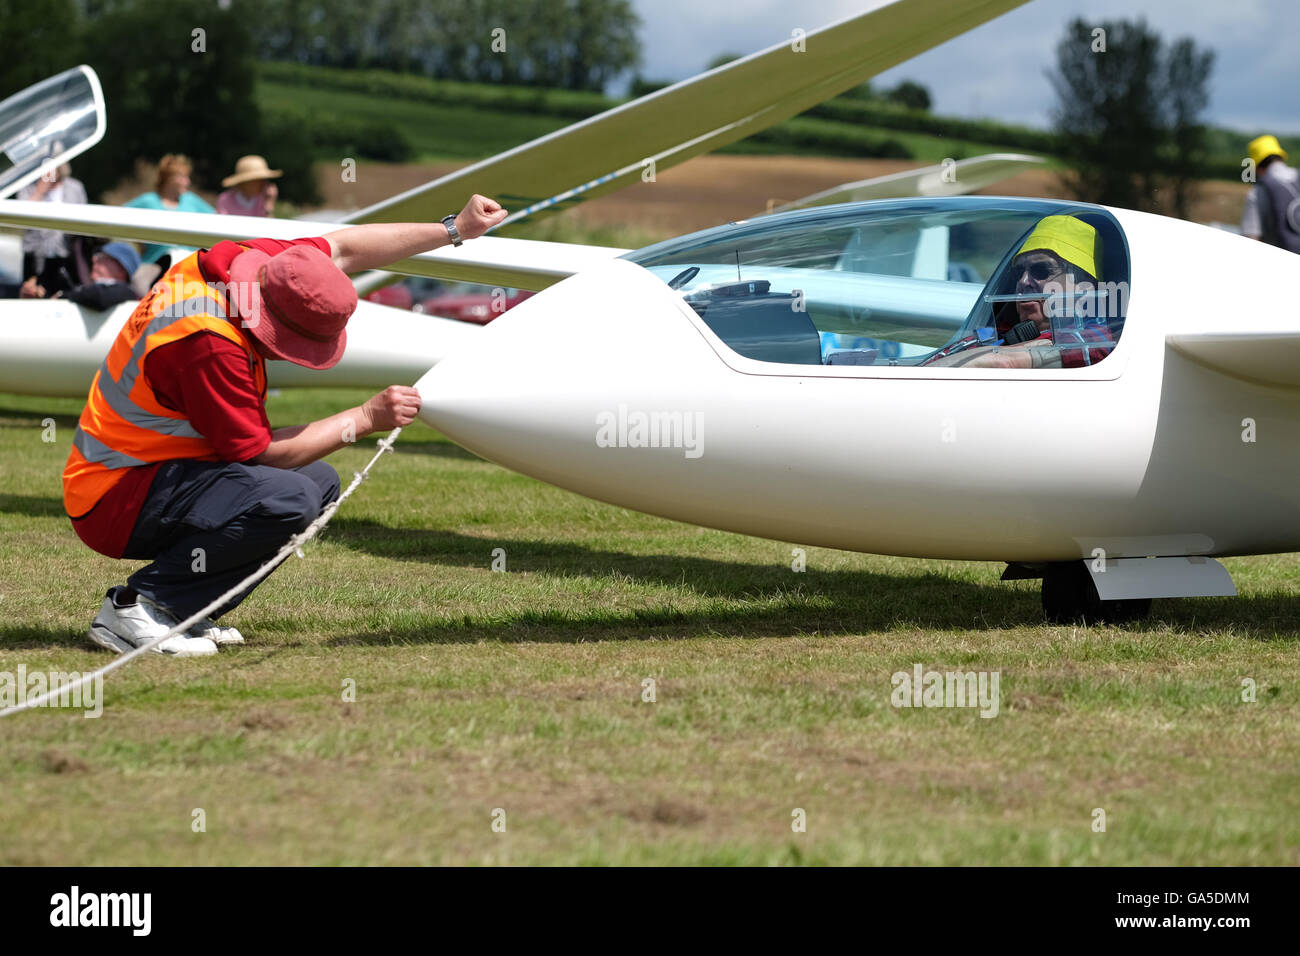 Shobdon airfield, Herefordshire, UK - July 2016 - Ground crew connect an aero tow rope to a glider in preparation for launching on Day 2 of the Competition Enterprise gliding event. Stock Photo